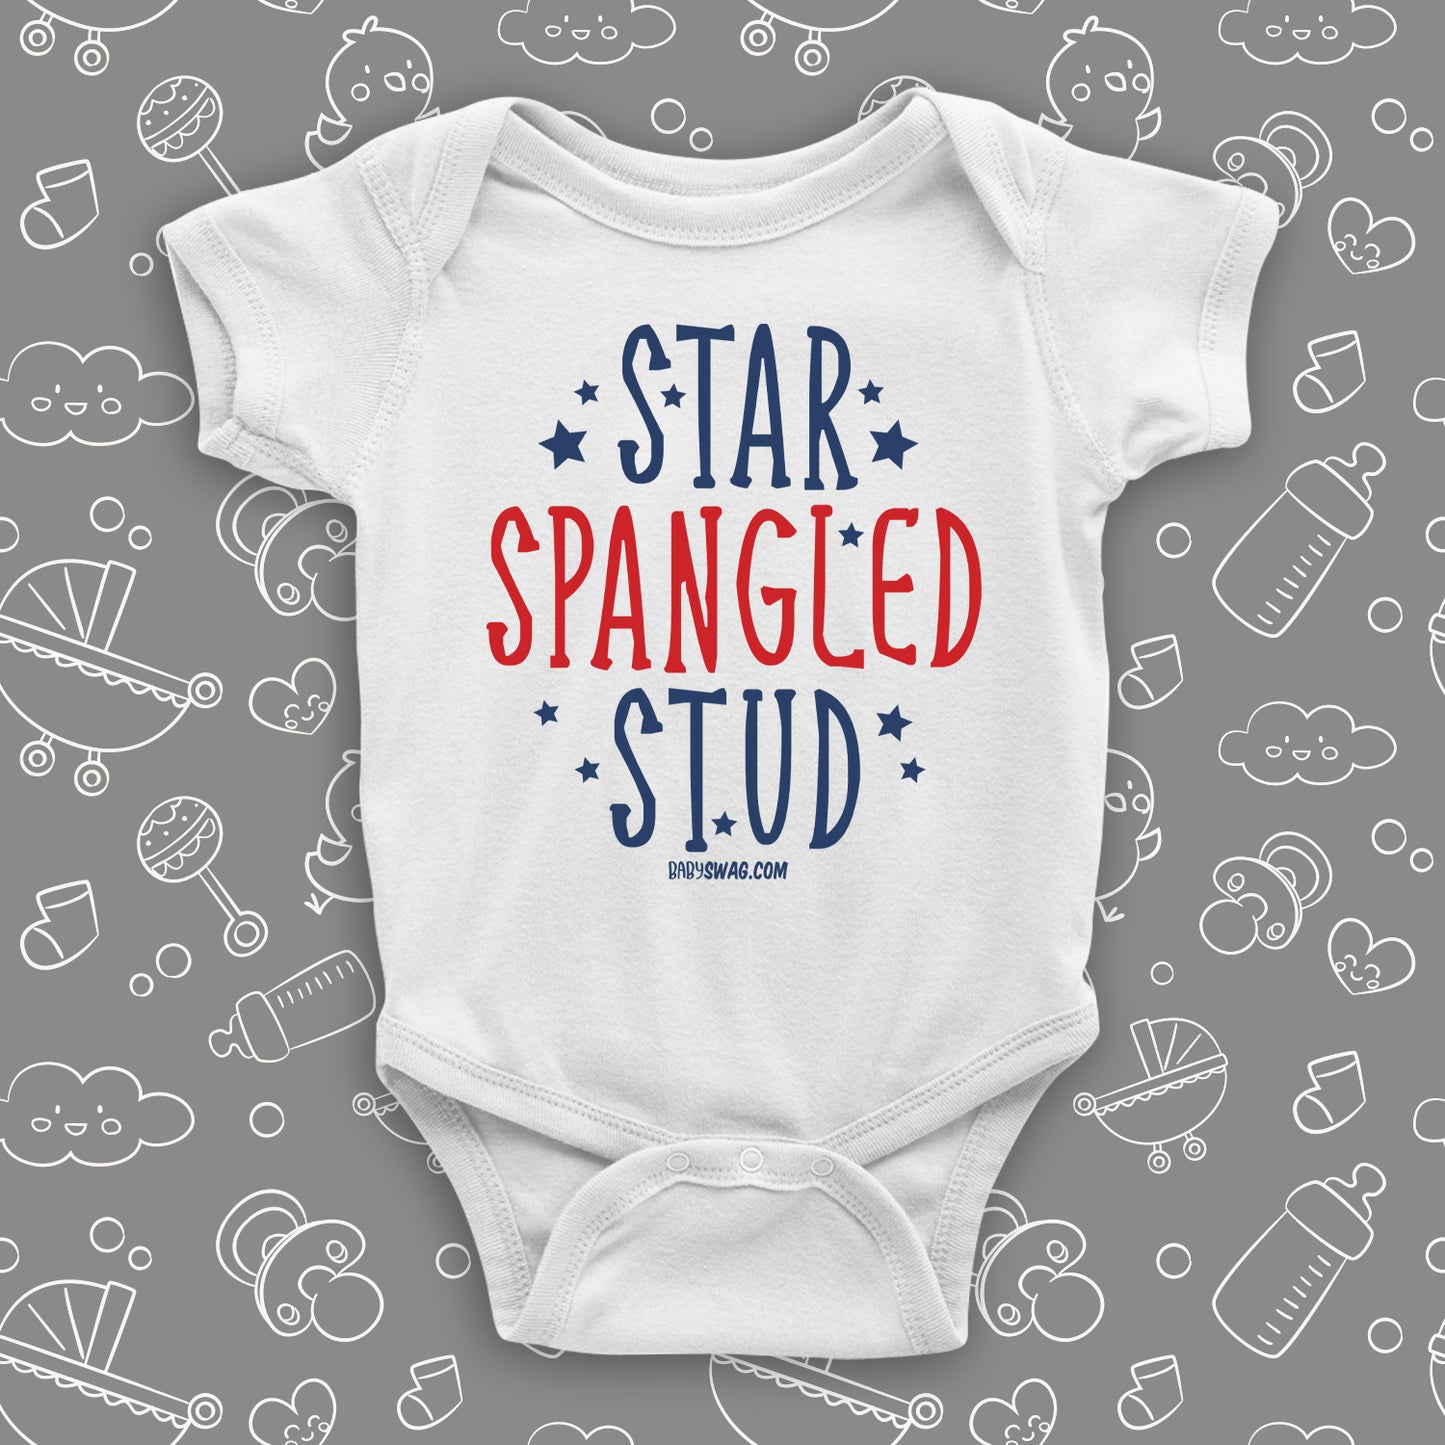 The unique baby boy onesies with the caption "Star Spangled Stud" in white.